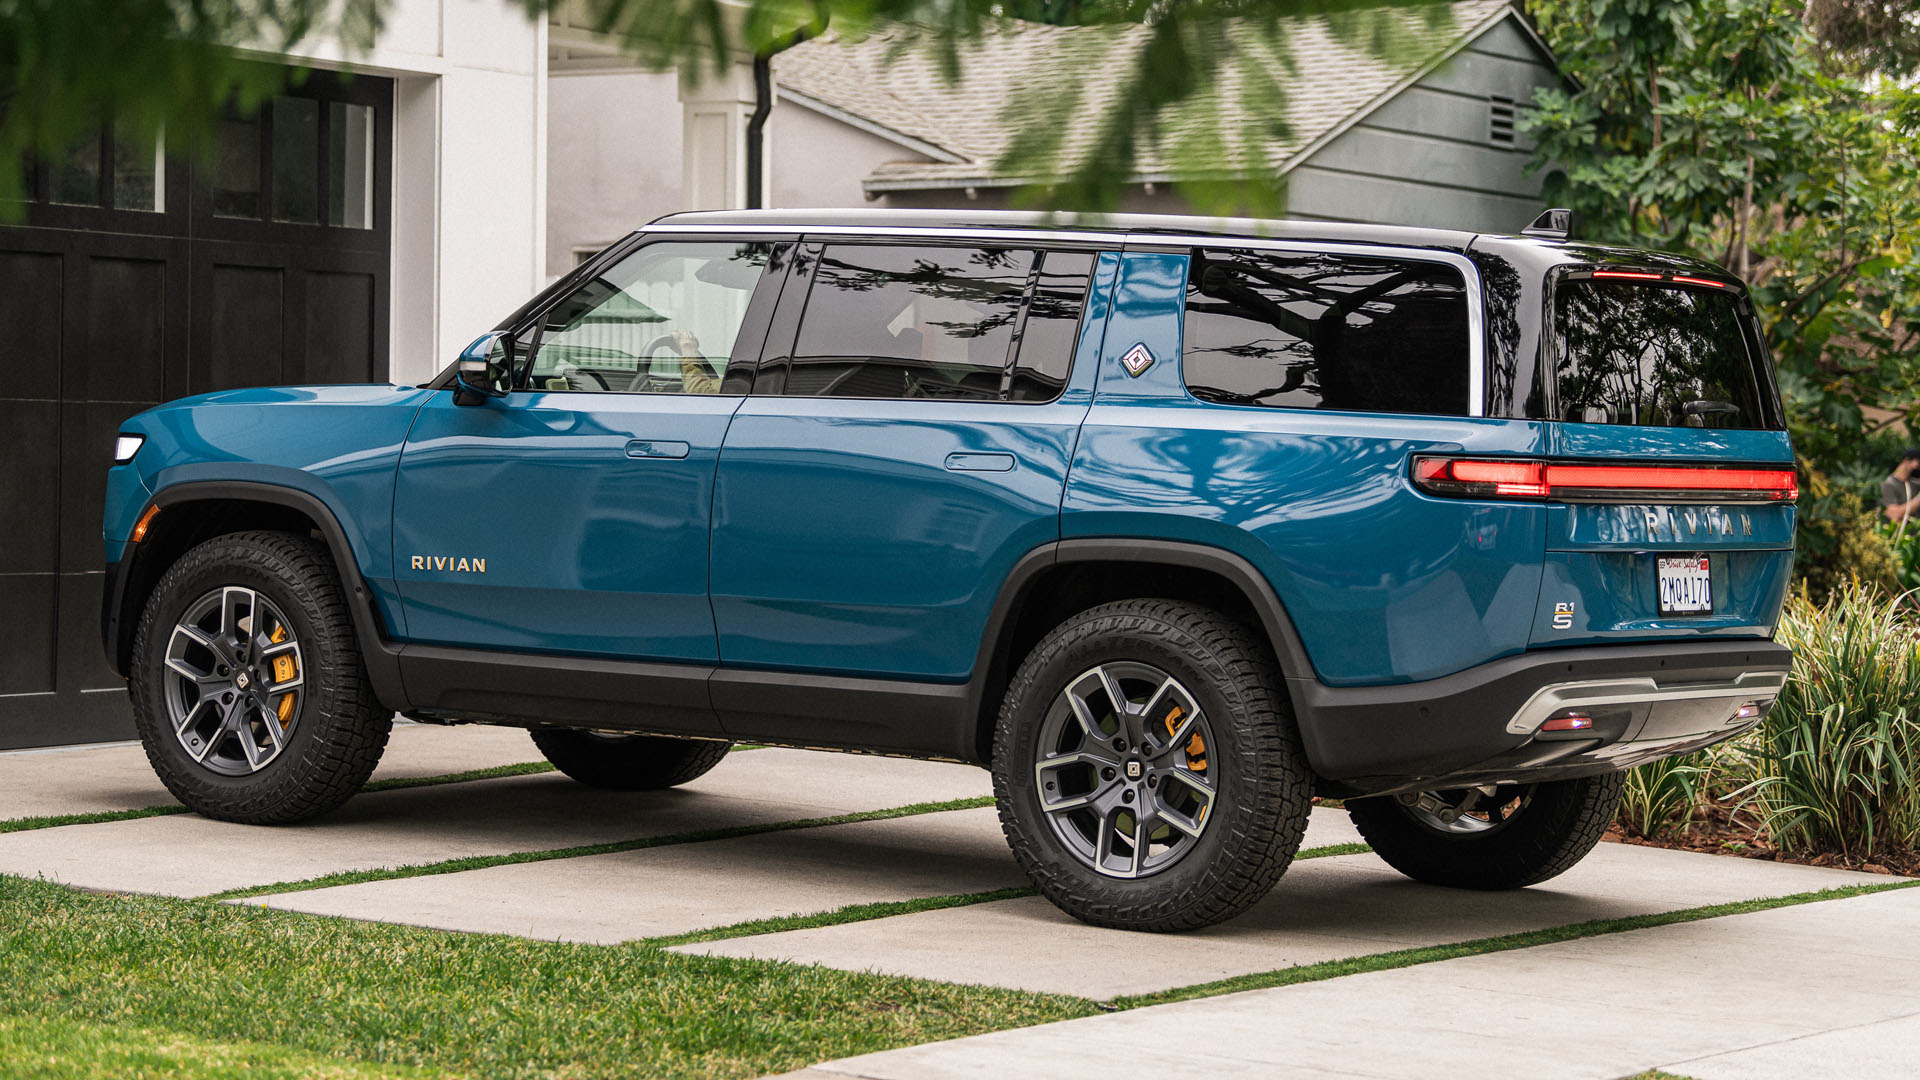 Rivian Battery Switch Could Increase Production but Lower Range